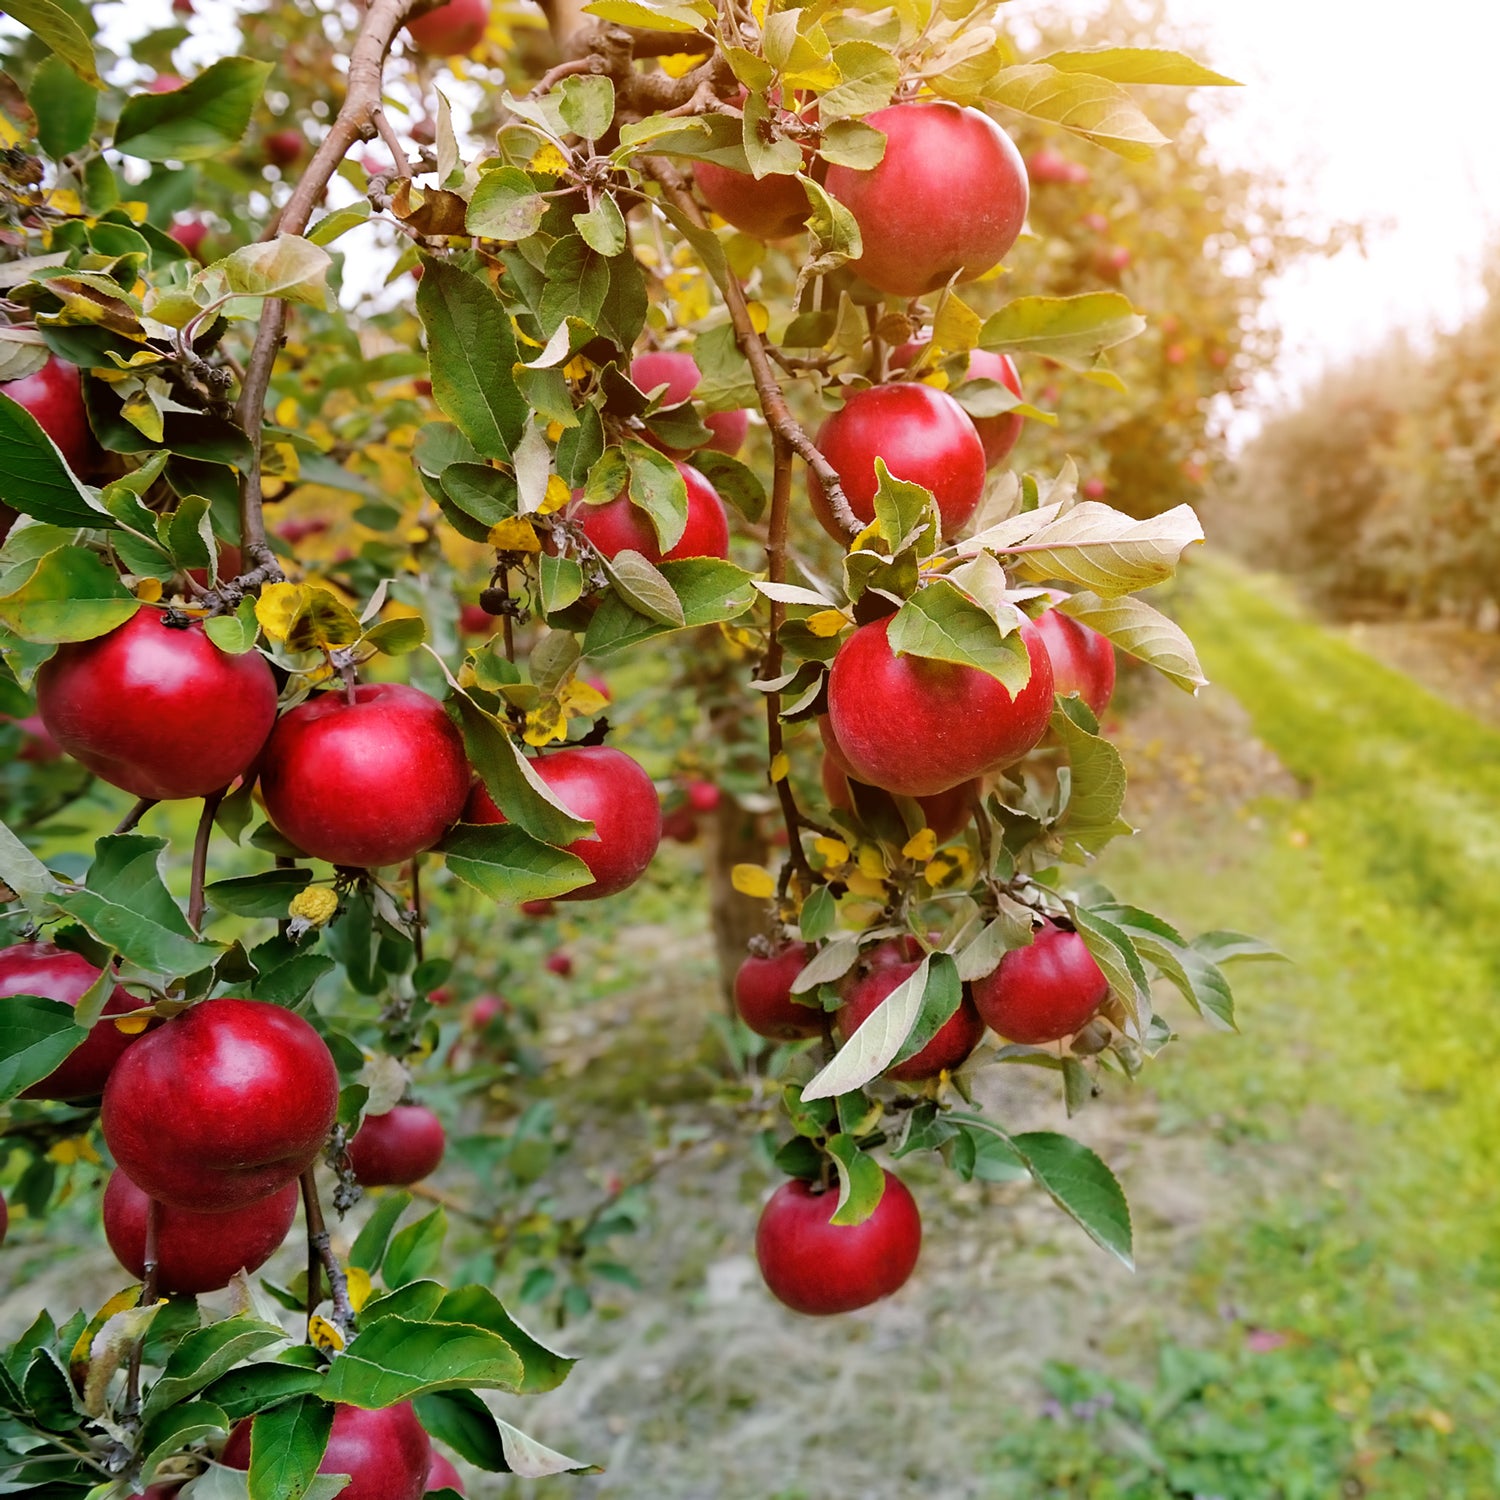 An Apple tree full of red apples - an inspiration for our "orchard Apple" wax fragrance bars